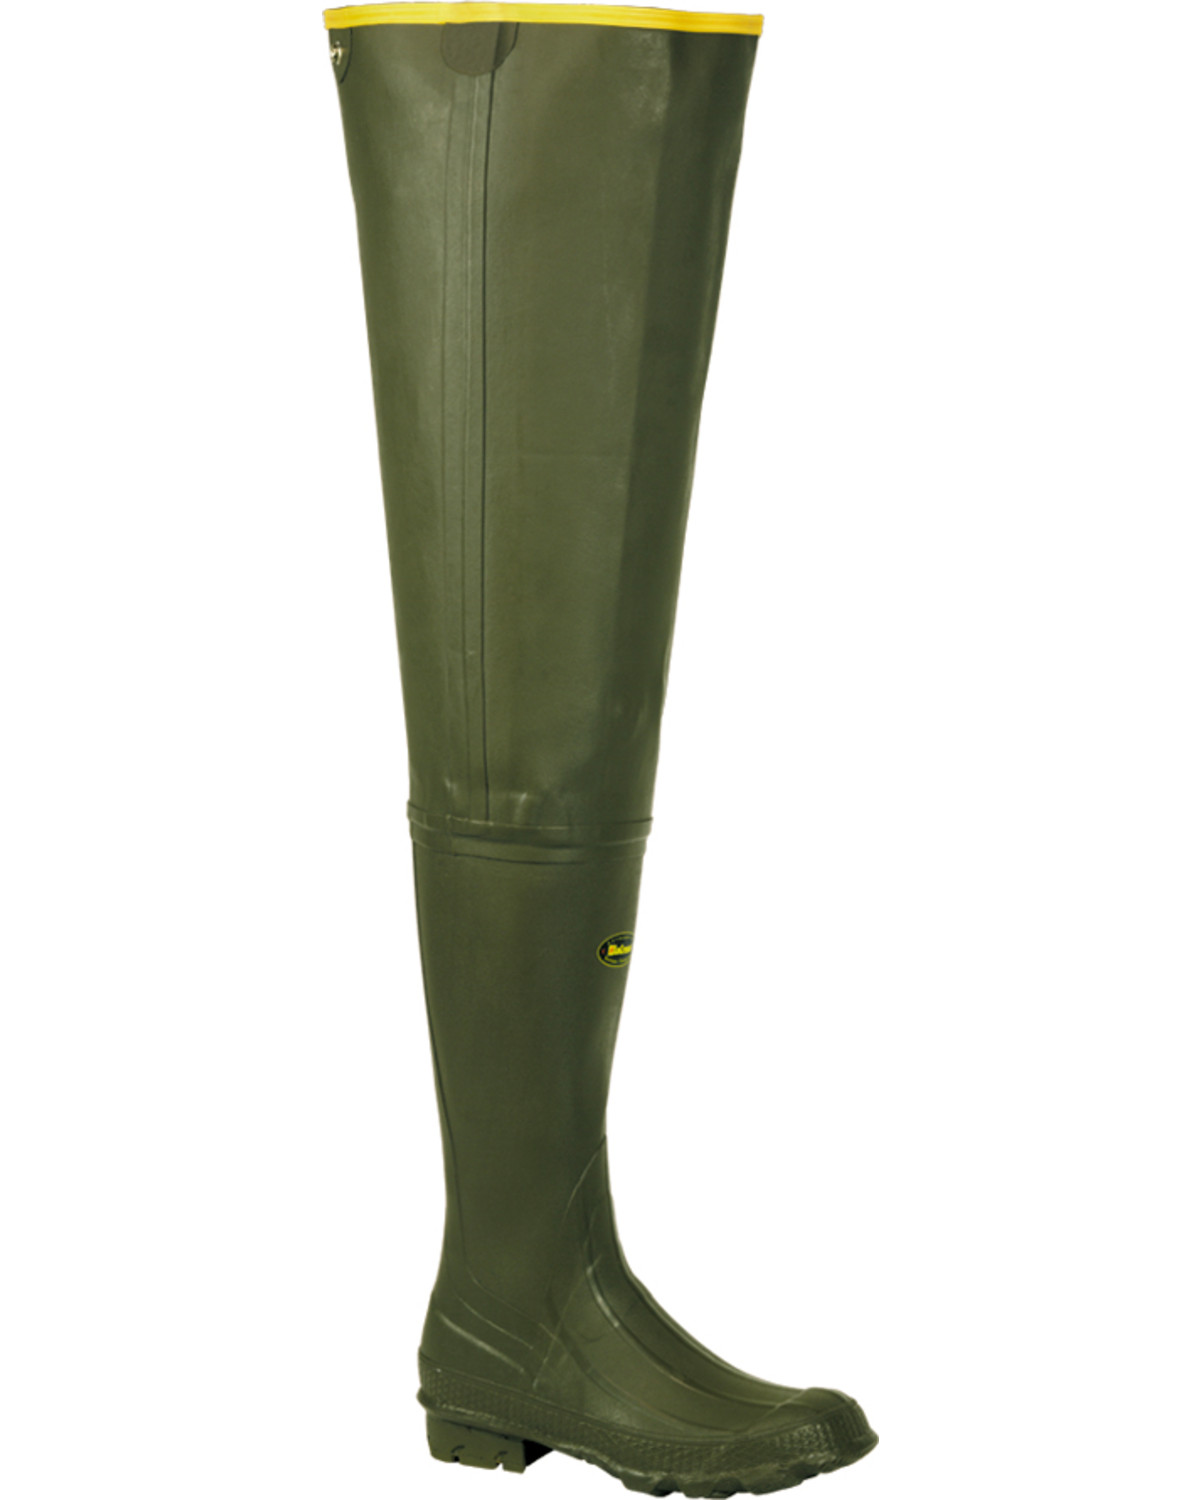 LaCrosse Men's Big Chief 32" Wader Boots - Round Toe